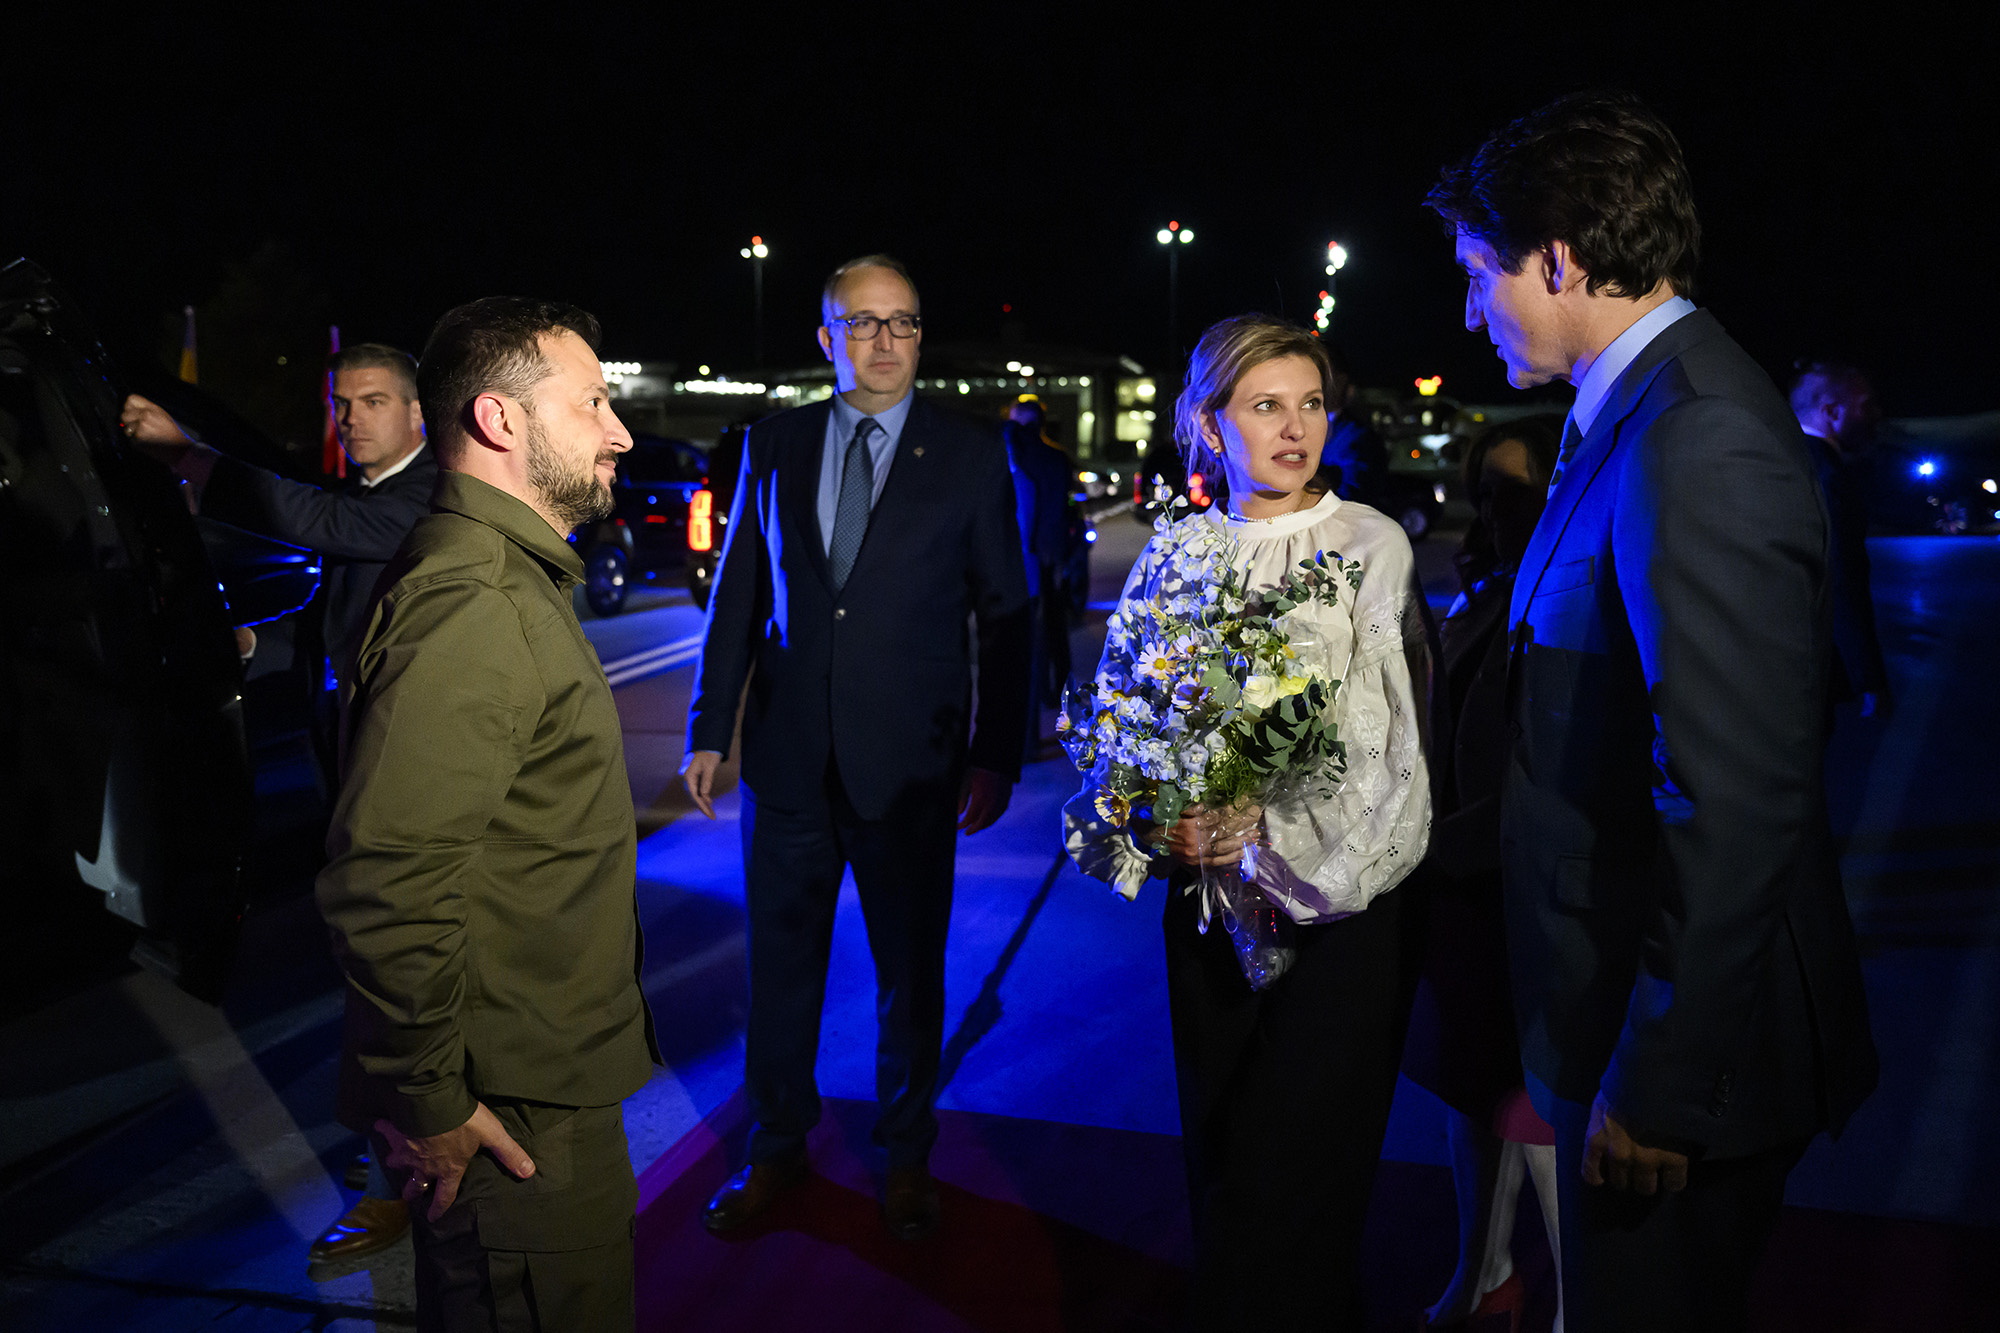 Canadian Prime Minister Justin Trudeau, right, speaks with Ukrainian President Volodymyr Zelensky, left, and his wife Olena Zelenska after their arrival at Ottawa Macdonald-Cartier International Airport in Ottawa, Ontario, on September 21.